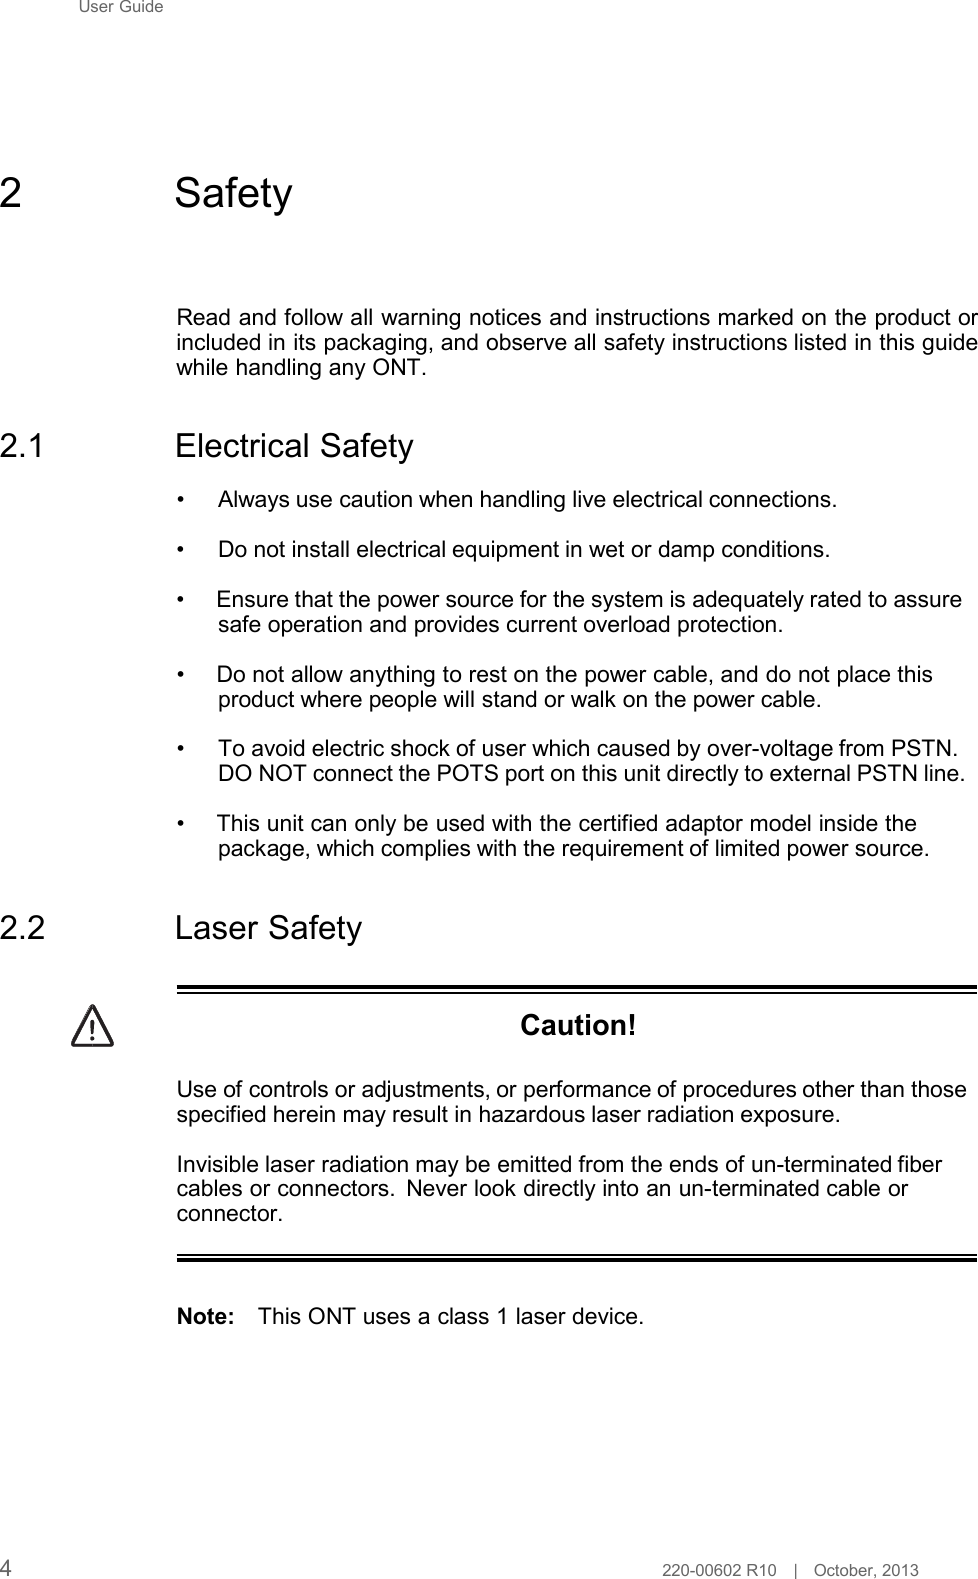 User Guide        2  Safety     Read and follow all warning notices and instructions marked on the product or included in its packaging, and observe all safety instructions listed in this guide while handling any ONT.   2.1  Electrical Safety  •     Always use caution when handling live electrical connections.  •     Do not install electrical equipment in wet or damp conditions.  • Ensure that the power source for the system is adequately rated to assure safe operation and provides current overload protection.  • Do not allow anything to rest on the power cable, and do not place this product where people will stand or walk on the power cable.  •     To avoid electric shock of user which caused by over-voltage from PSTN. DO NOT connect the POTS port on this unit directly to external PSTN line.  • This unit can only be used with the certified adaptor model inside the package, which complies with the requirement of limited power source.   2.2  Laser Safety    Caution!   Use of controls or adjustments, or performance of procedures other than those specified herein may result in hazardous laser radiation exposure.  Invisible laser radiation may be emitted from the ends of un-terminated fiber cables or connectors. Never look directly into an un-terminated cable or connector.    Note: This ONT uses a class 1 laser device.            4  220-00602 R10   |   October, 2013 